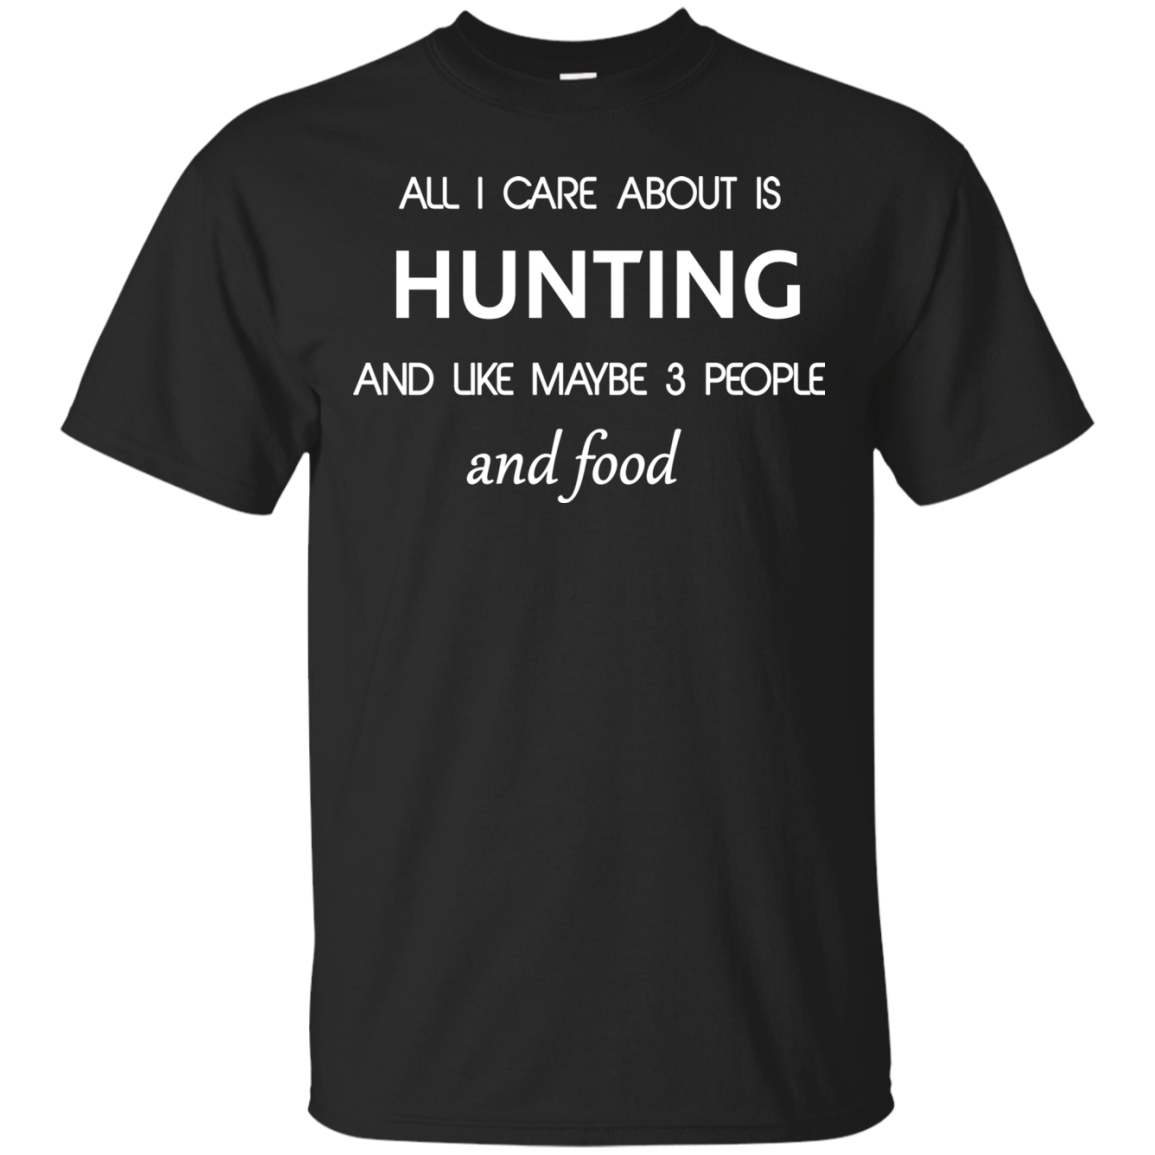 All I care about is Hunting T-shirt, Hoodie